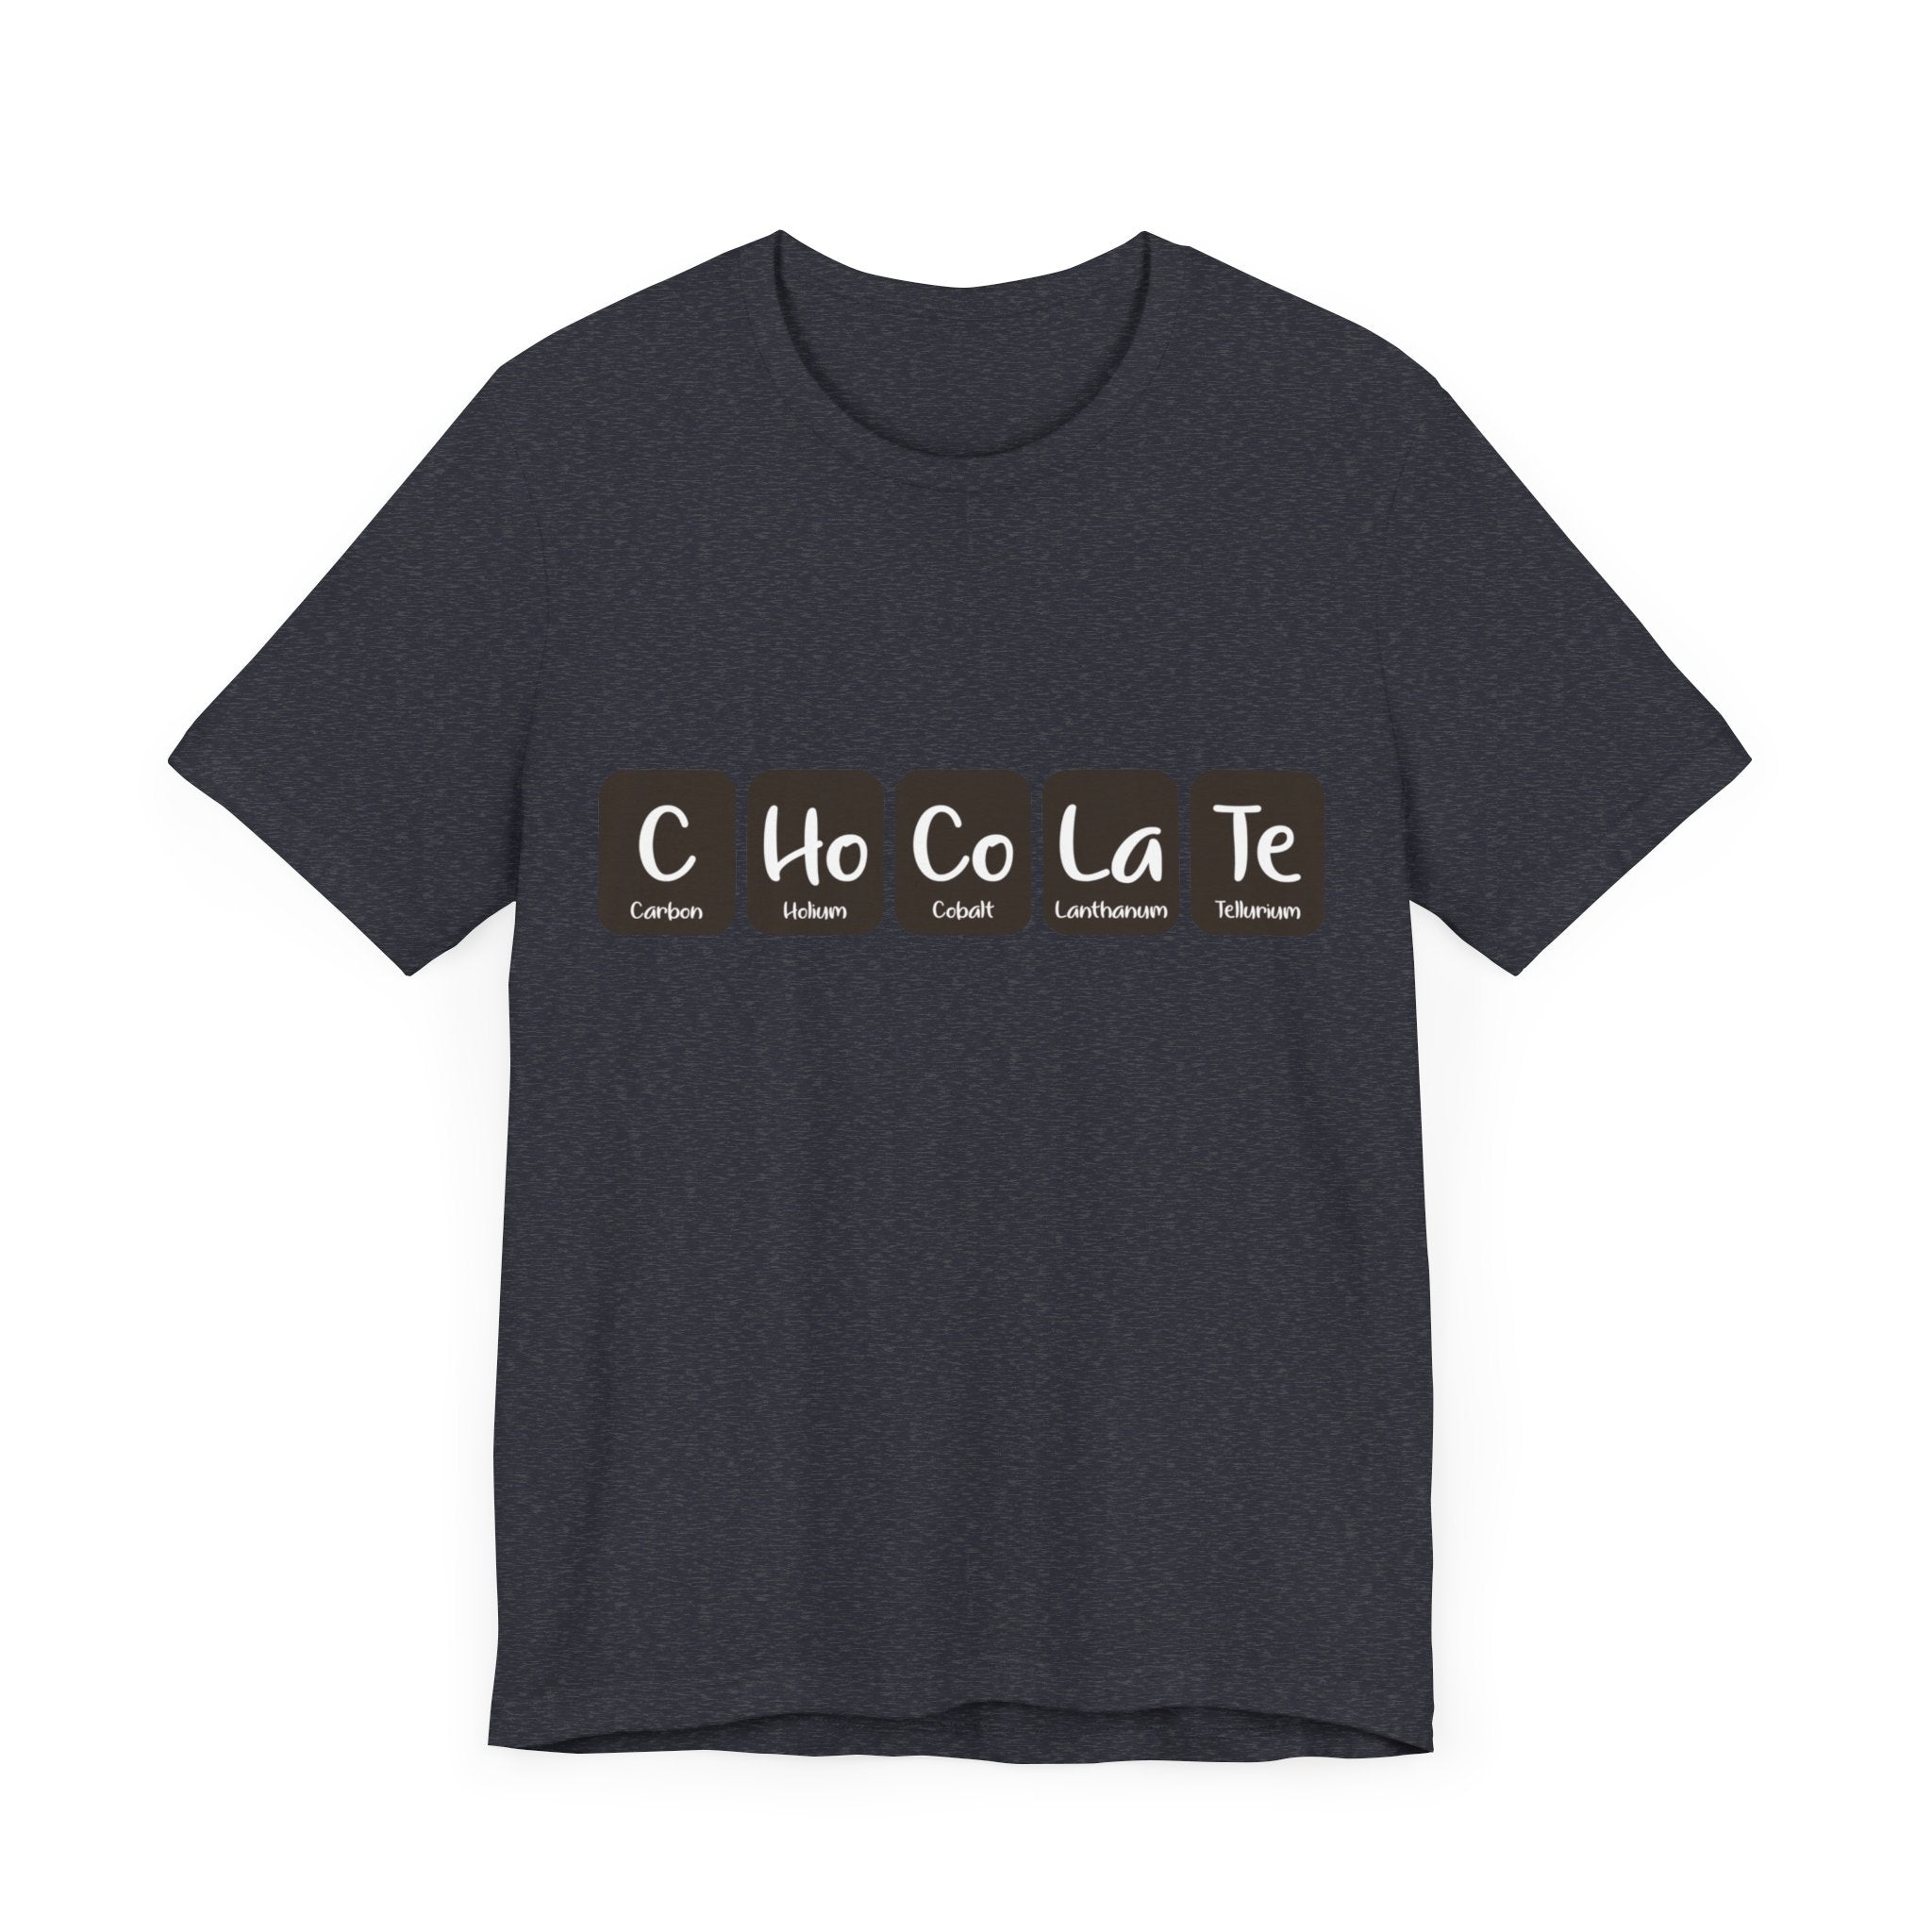 A black T-shirt featuring the word "Chocolate" spelled out using elements from the periodic table: Carbon, Holmium, Cobalt, Lanthanum, and Tellurium. Made from 100% Airlume cotton, this C-Ho-Co-La-Te - T-Shirt is a unique fashion statement.